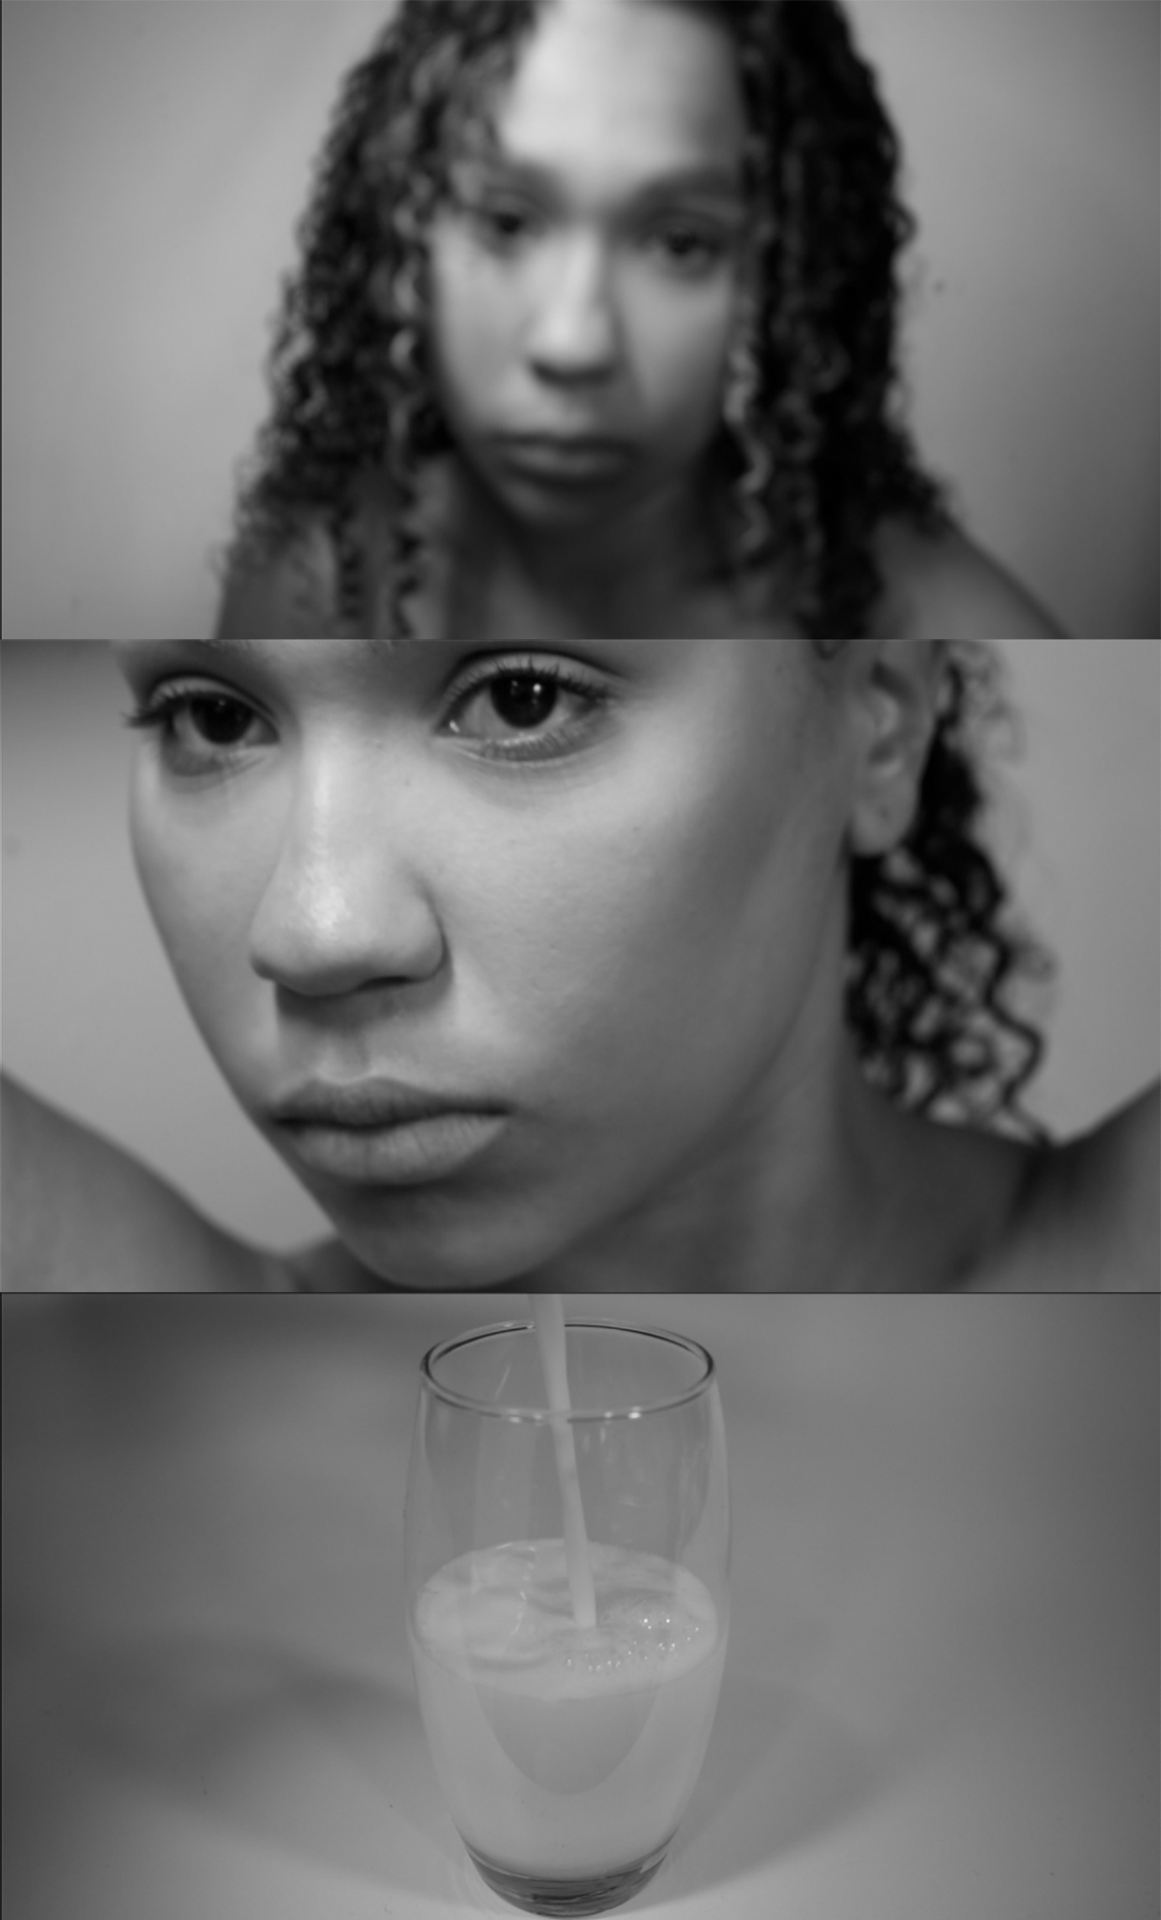 3 greyscale photos in a vertical line: a blurred face, an in focus dace, and a glass being filled with liquid.